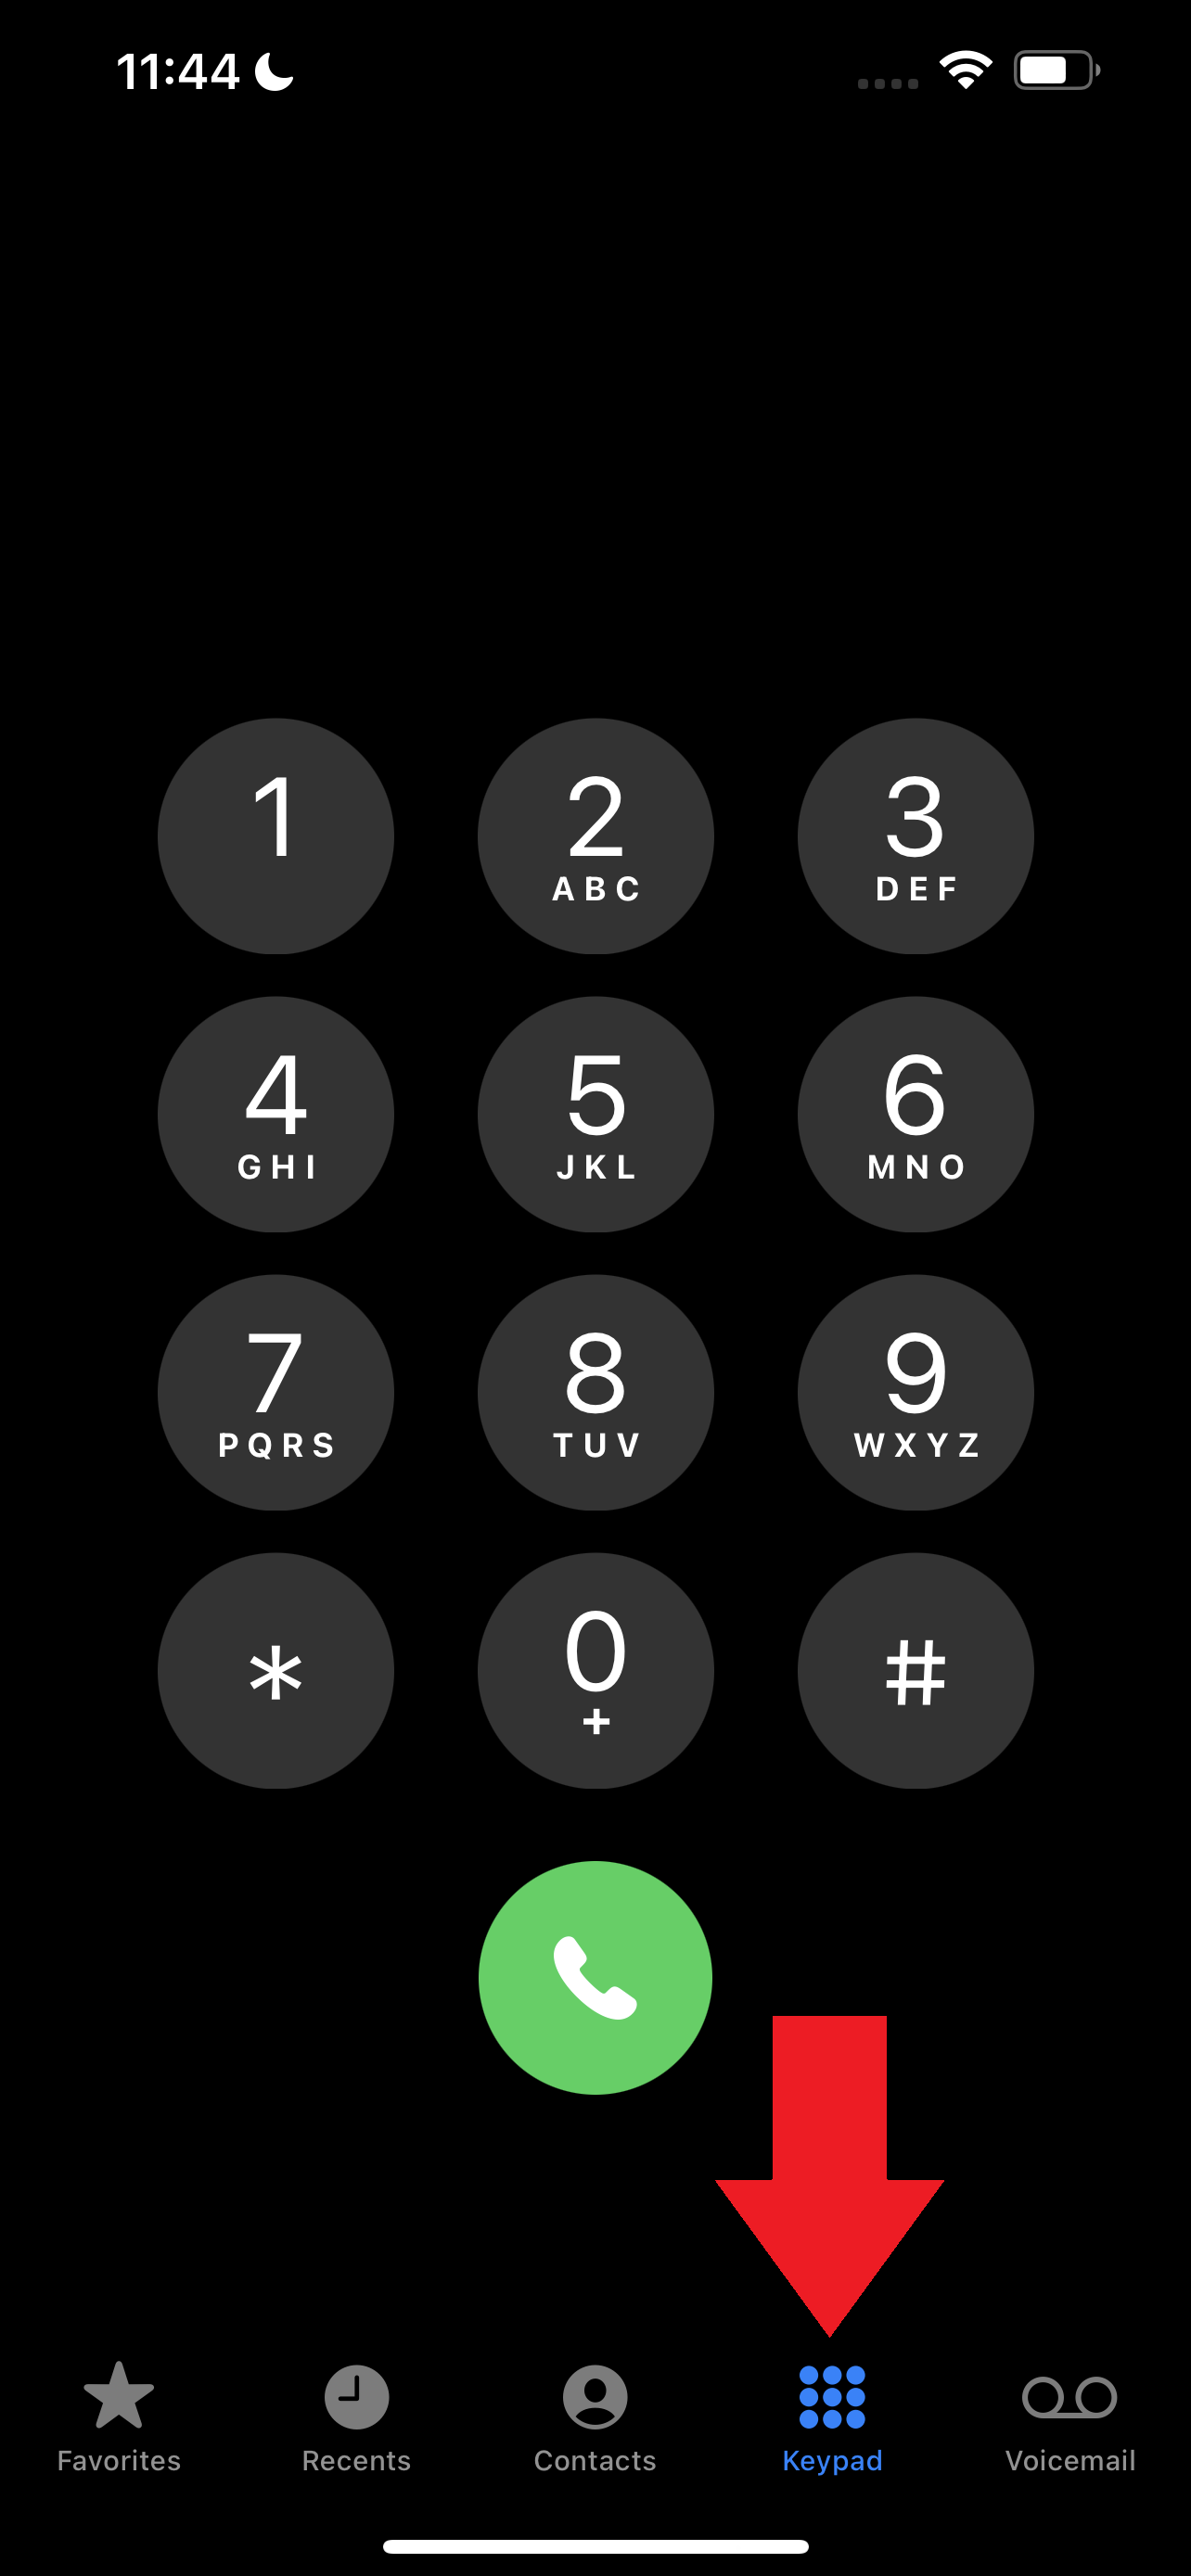 How to dial extension on iPhone